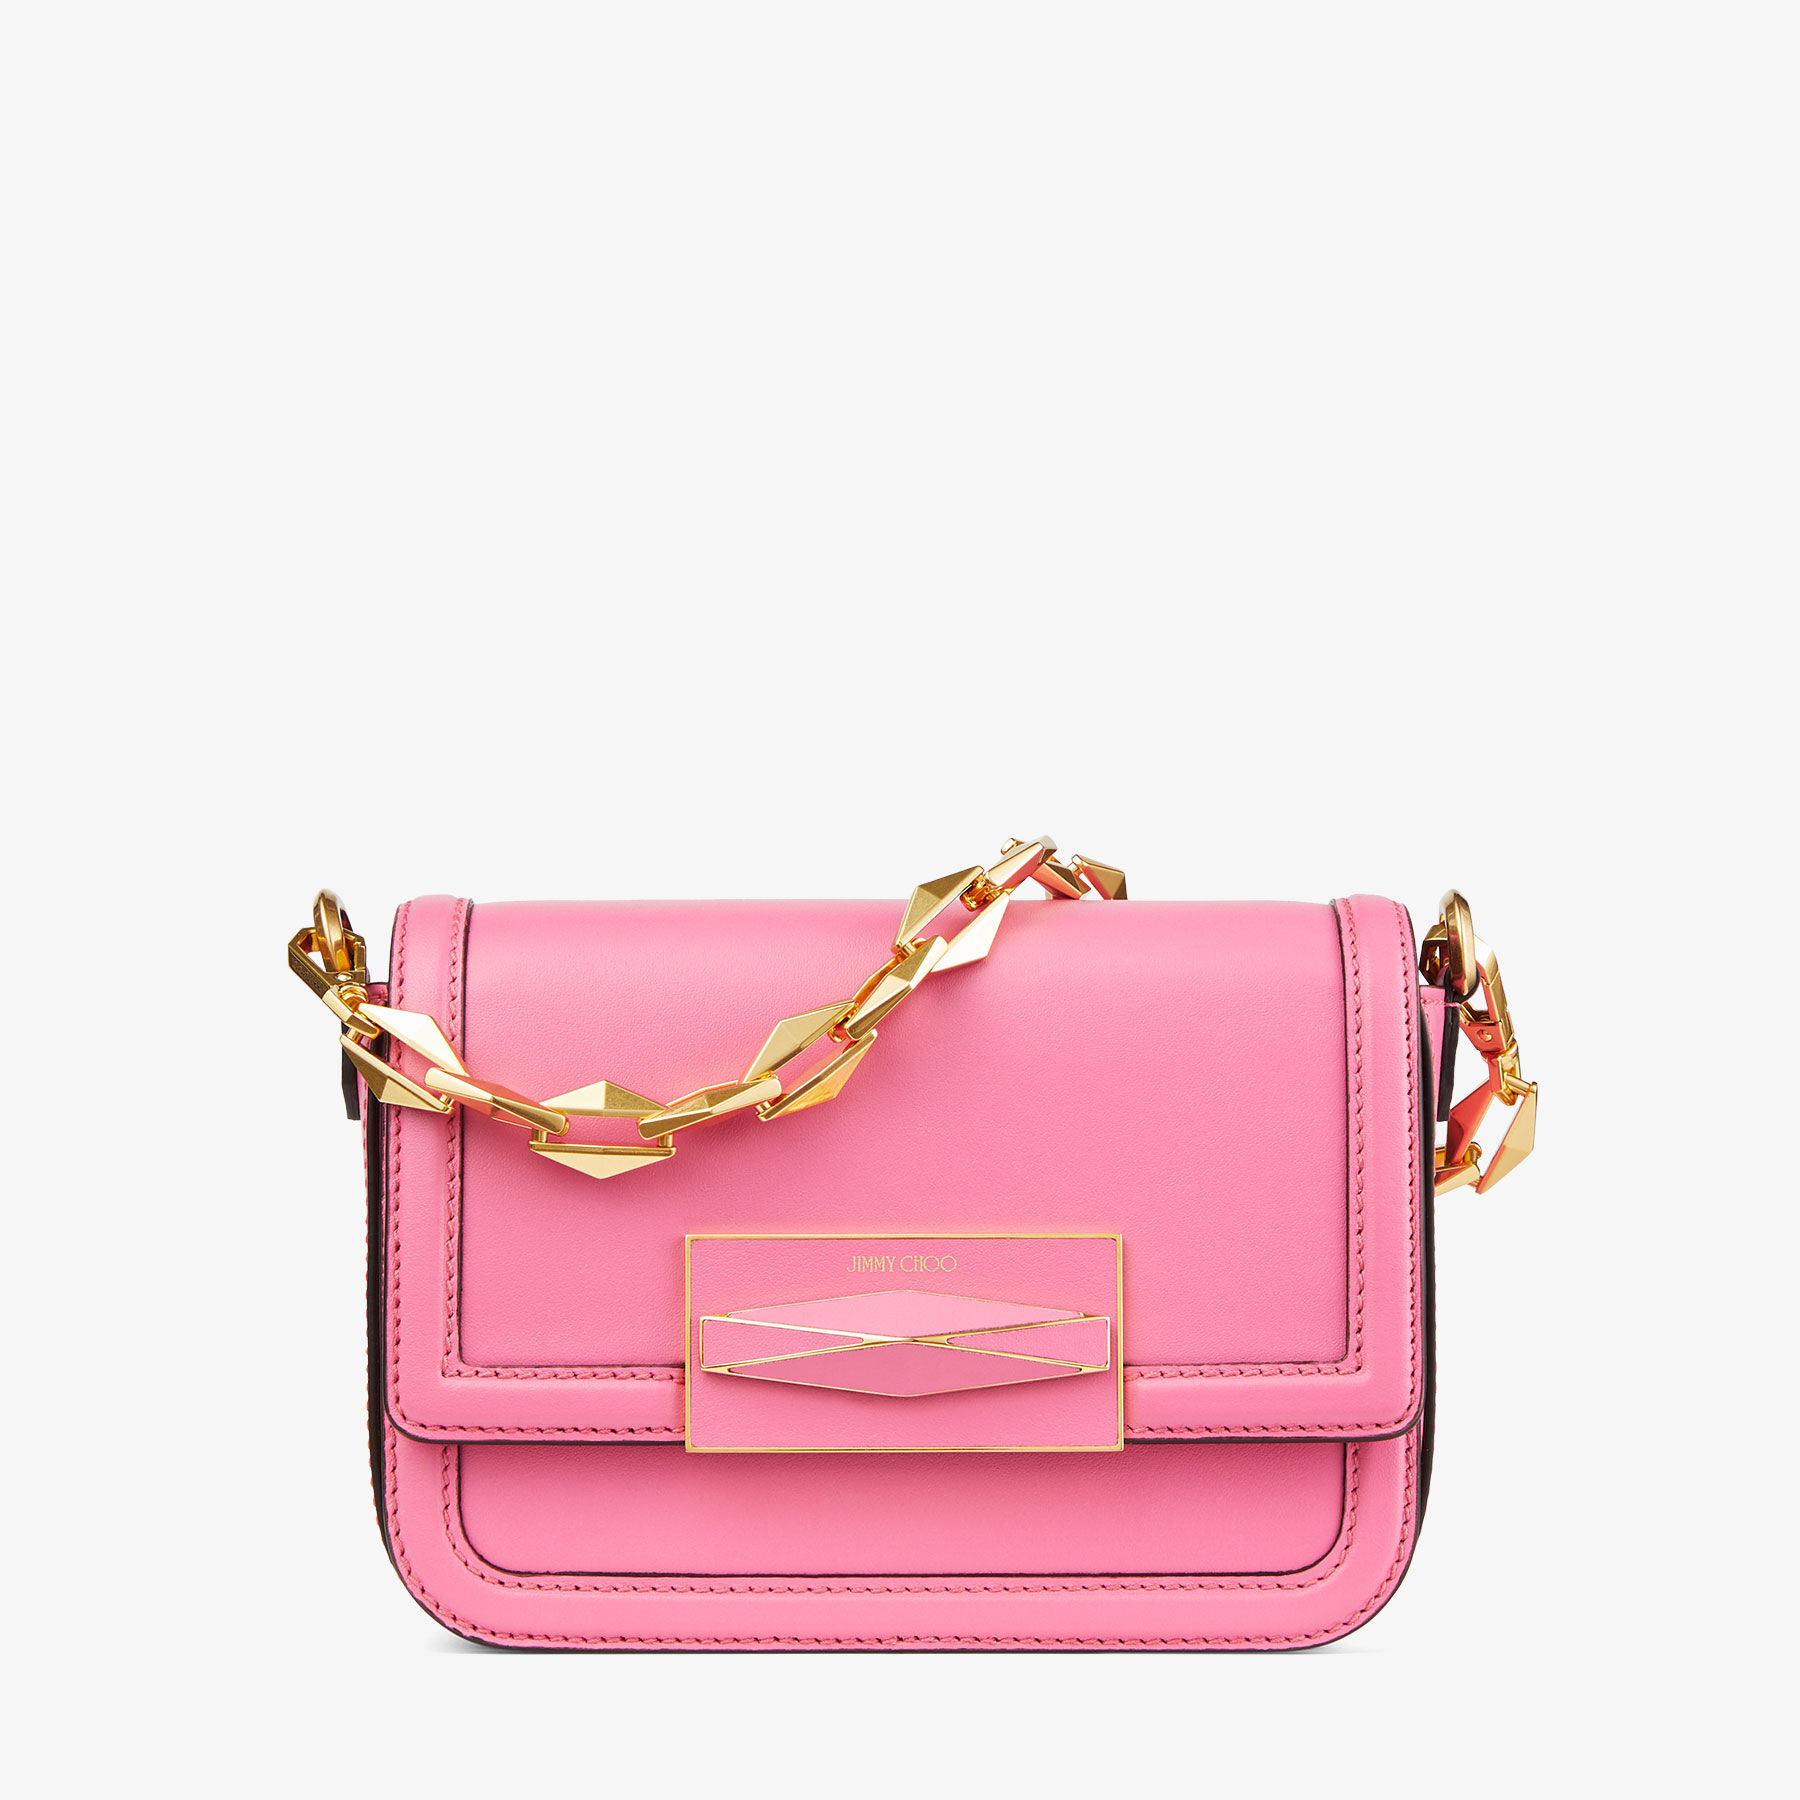 Diamond Crossbody | Candy Pink Smooth Calf Leather Bag | New Collection ...